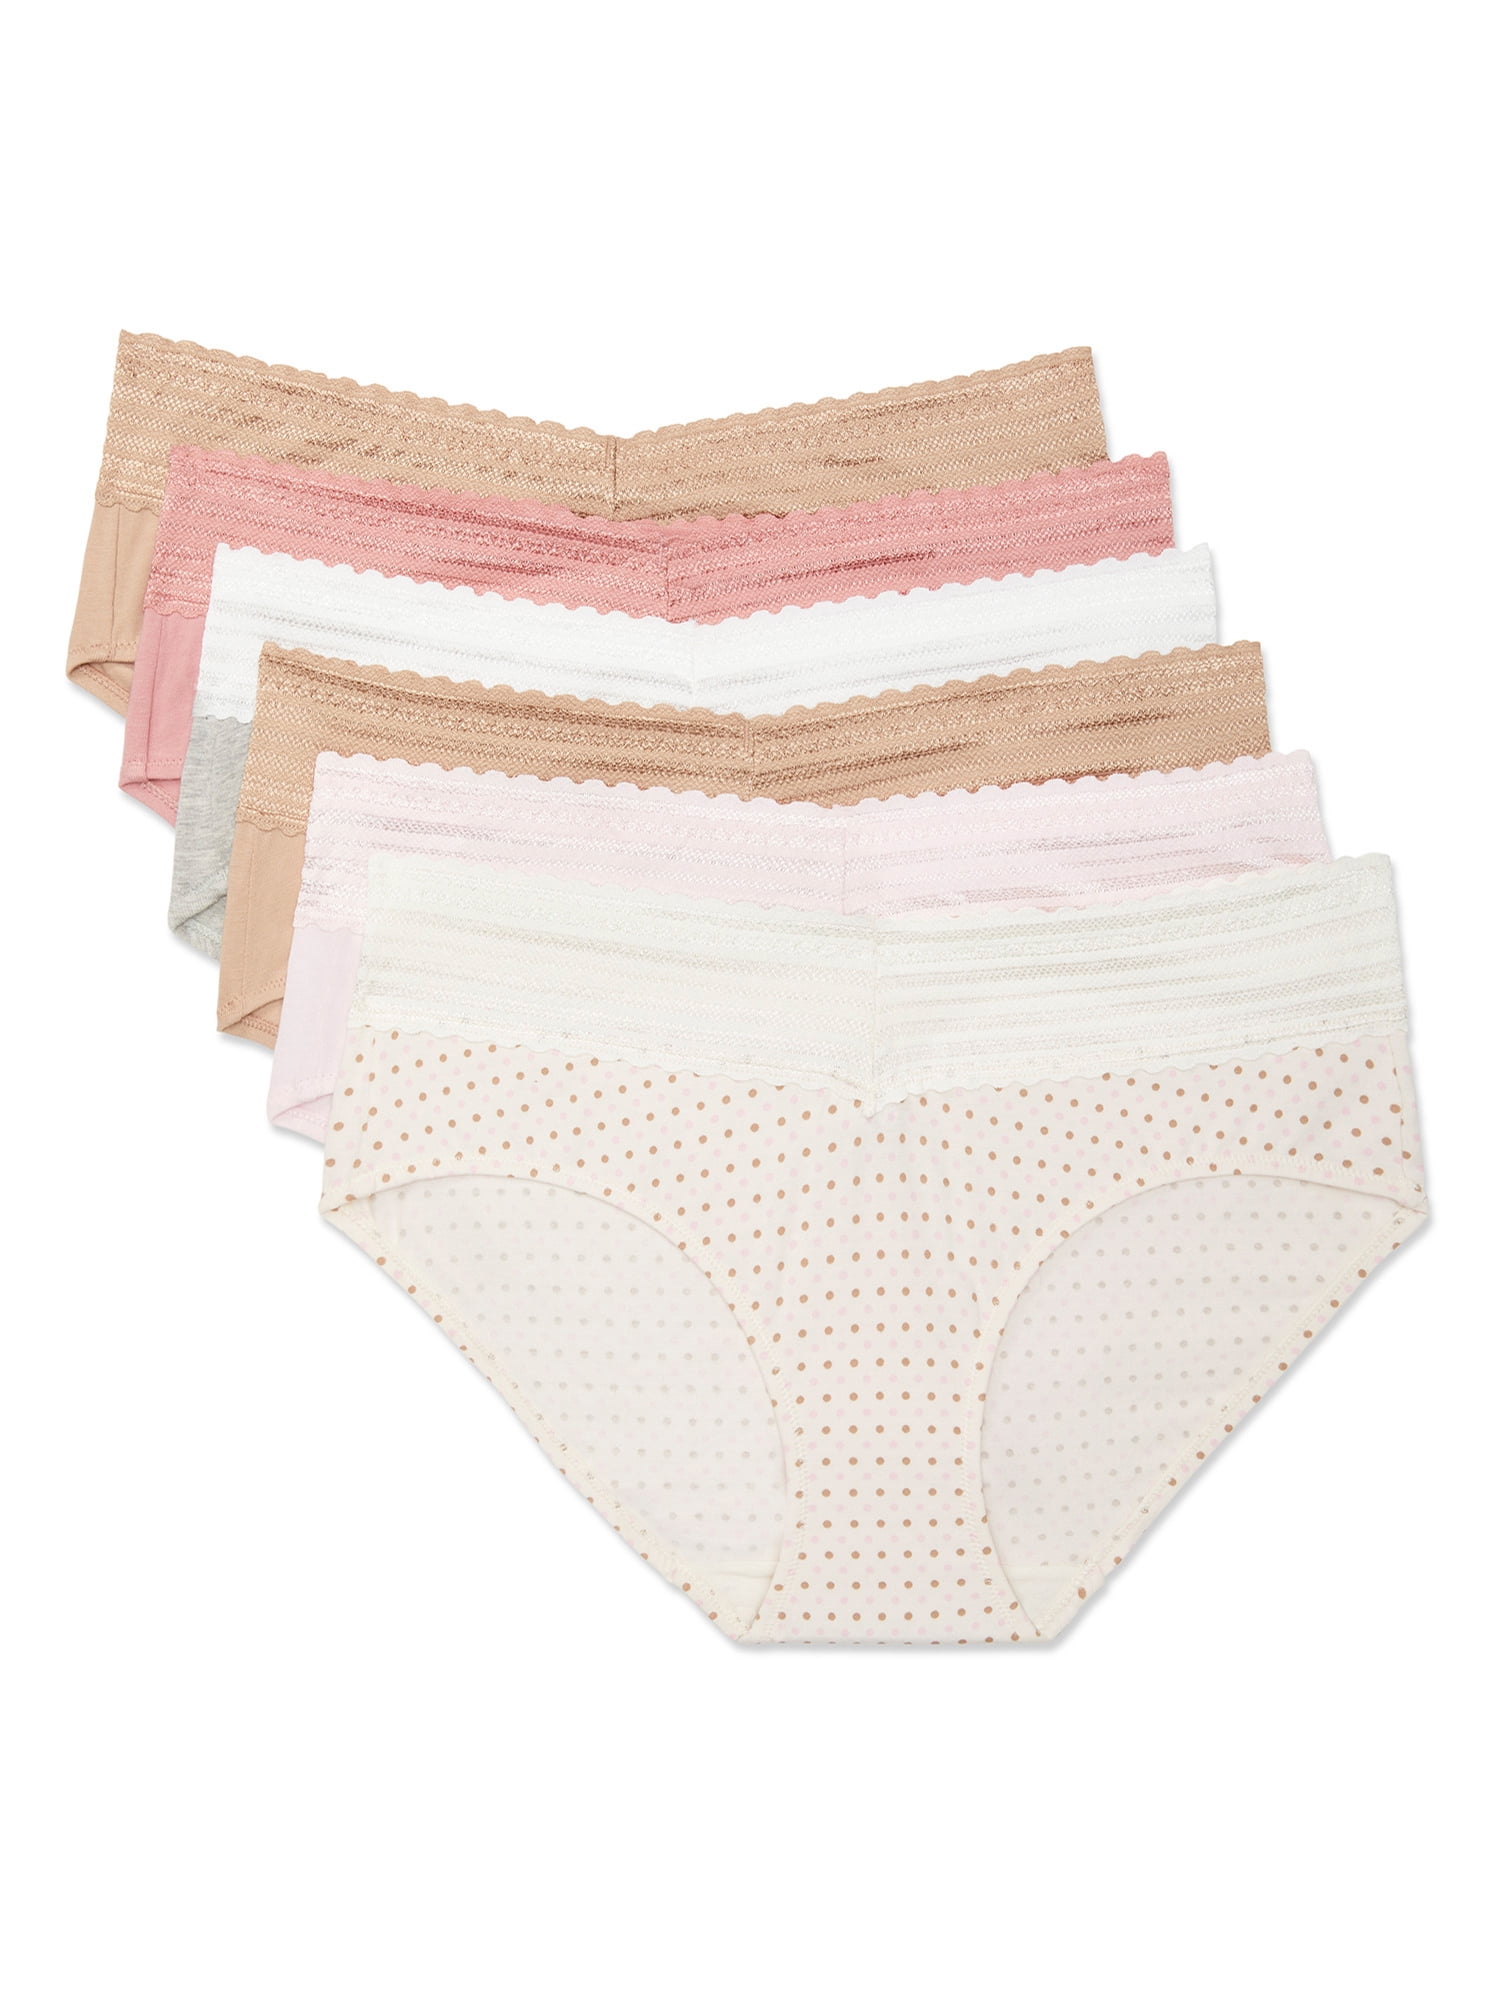 Warners® Blissful Benefits Dig-Free Comfort Waist with Lace Cotton Hipster  6-Pack RU2266W